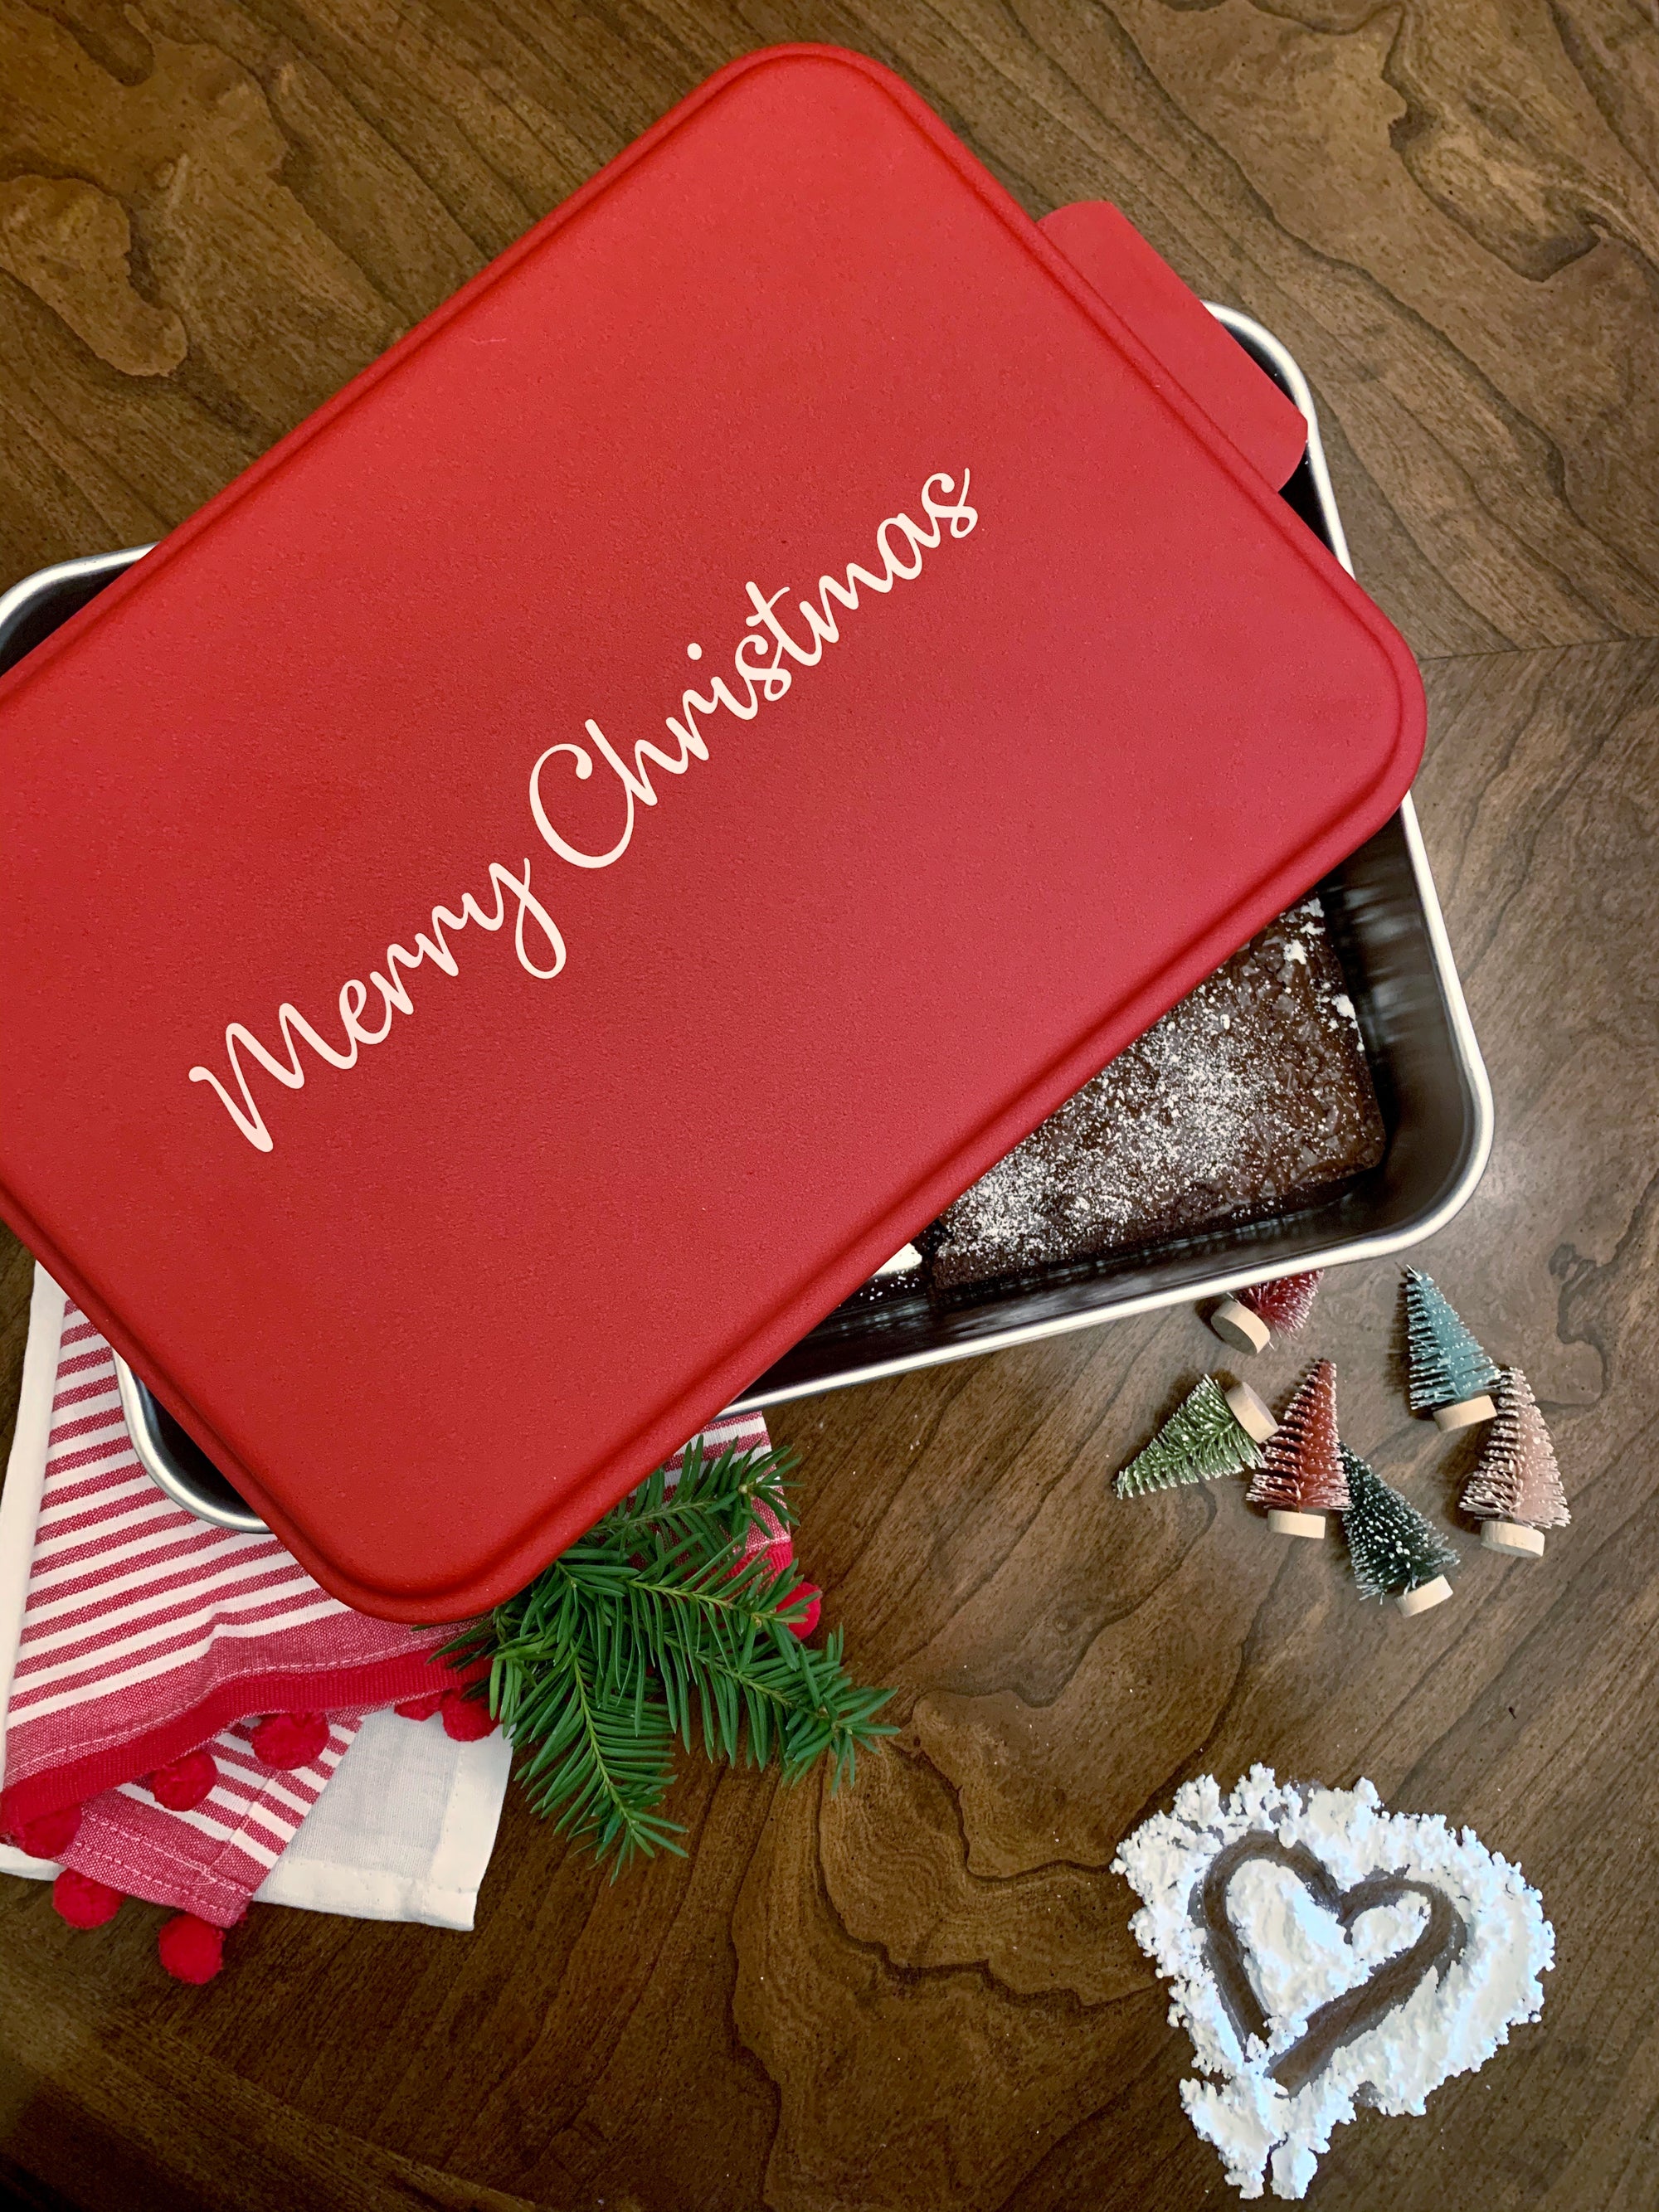 9 x 13 Aluminum Cake Pan with Red Lid - Merry Christmas